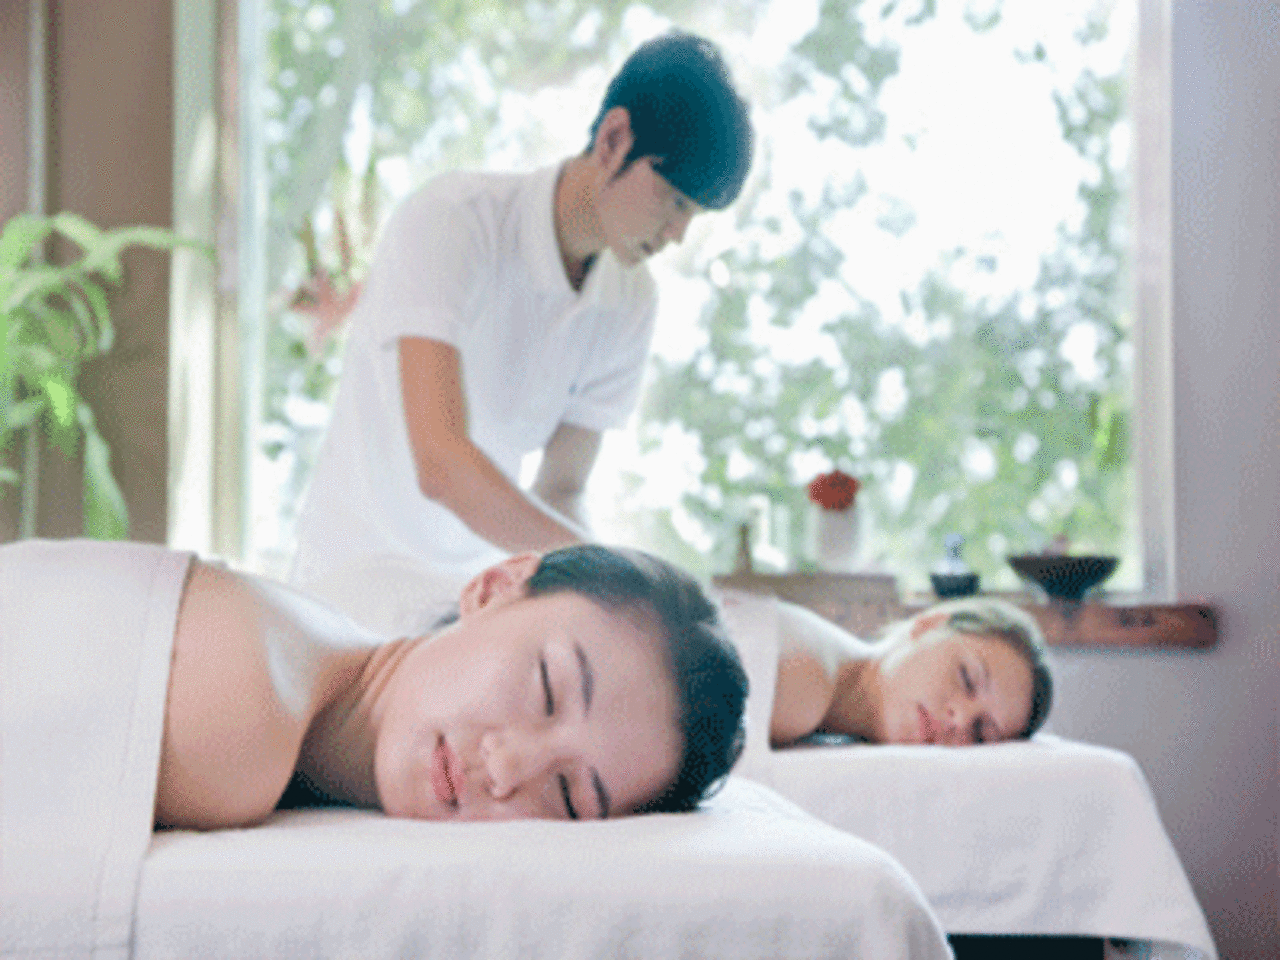 Quickies and cross gender spa massages find takers in the city picture